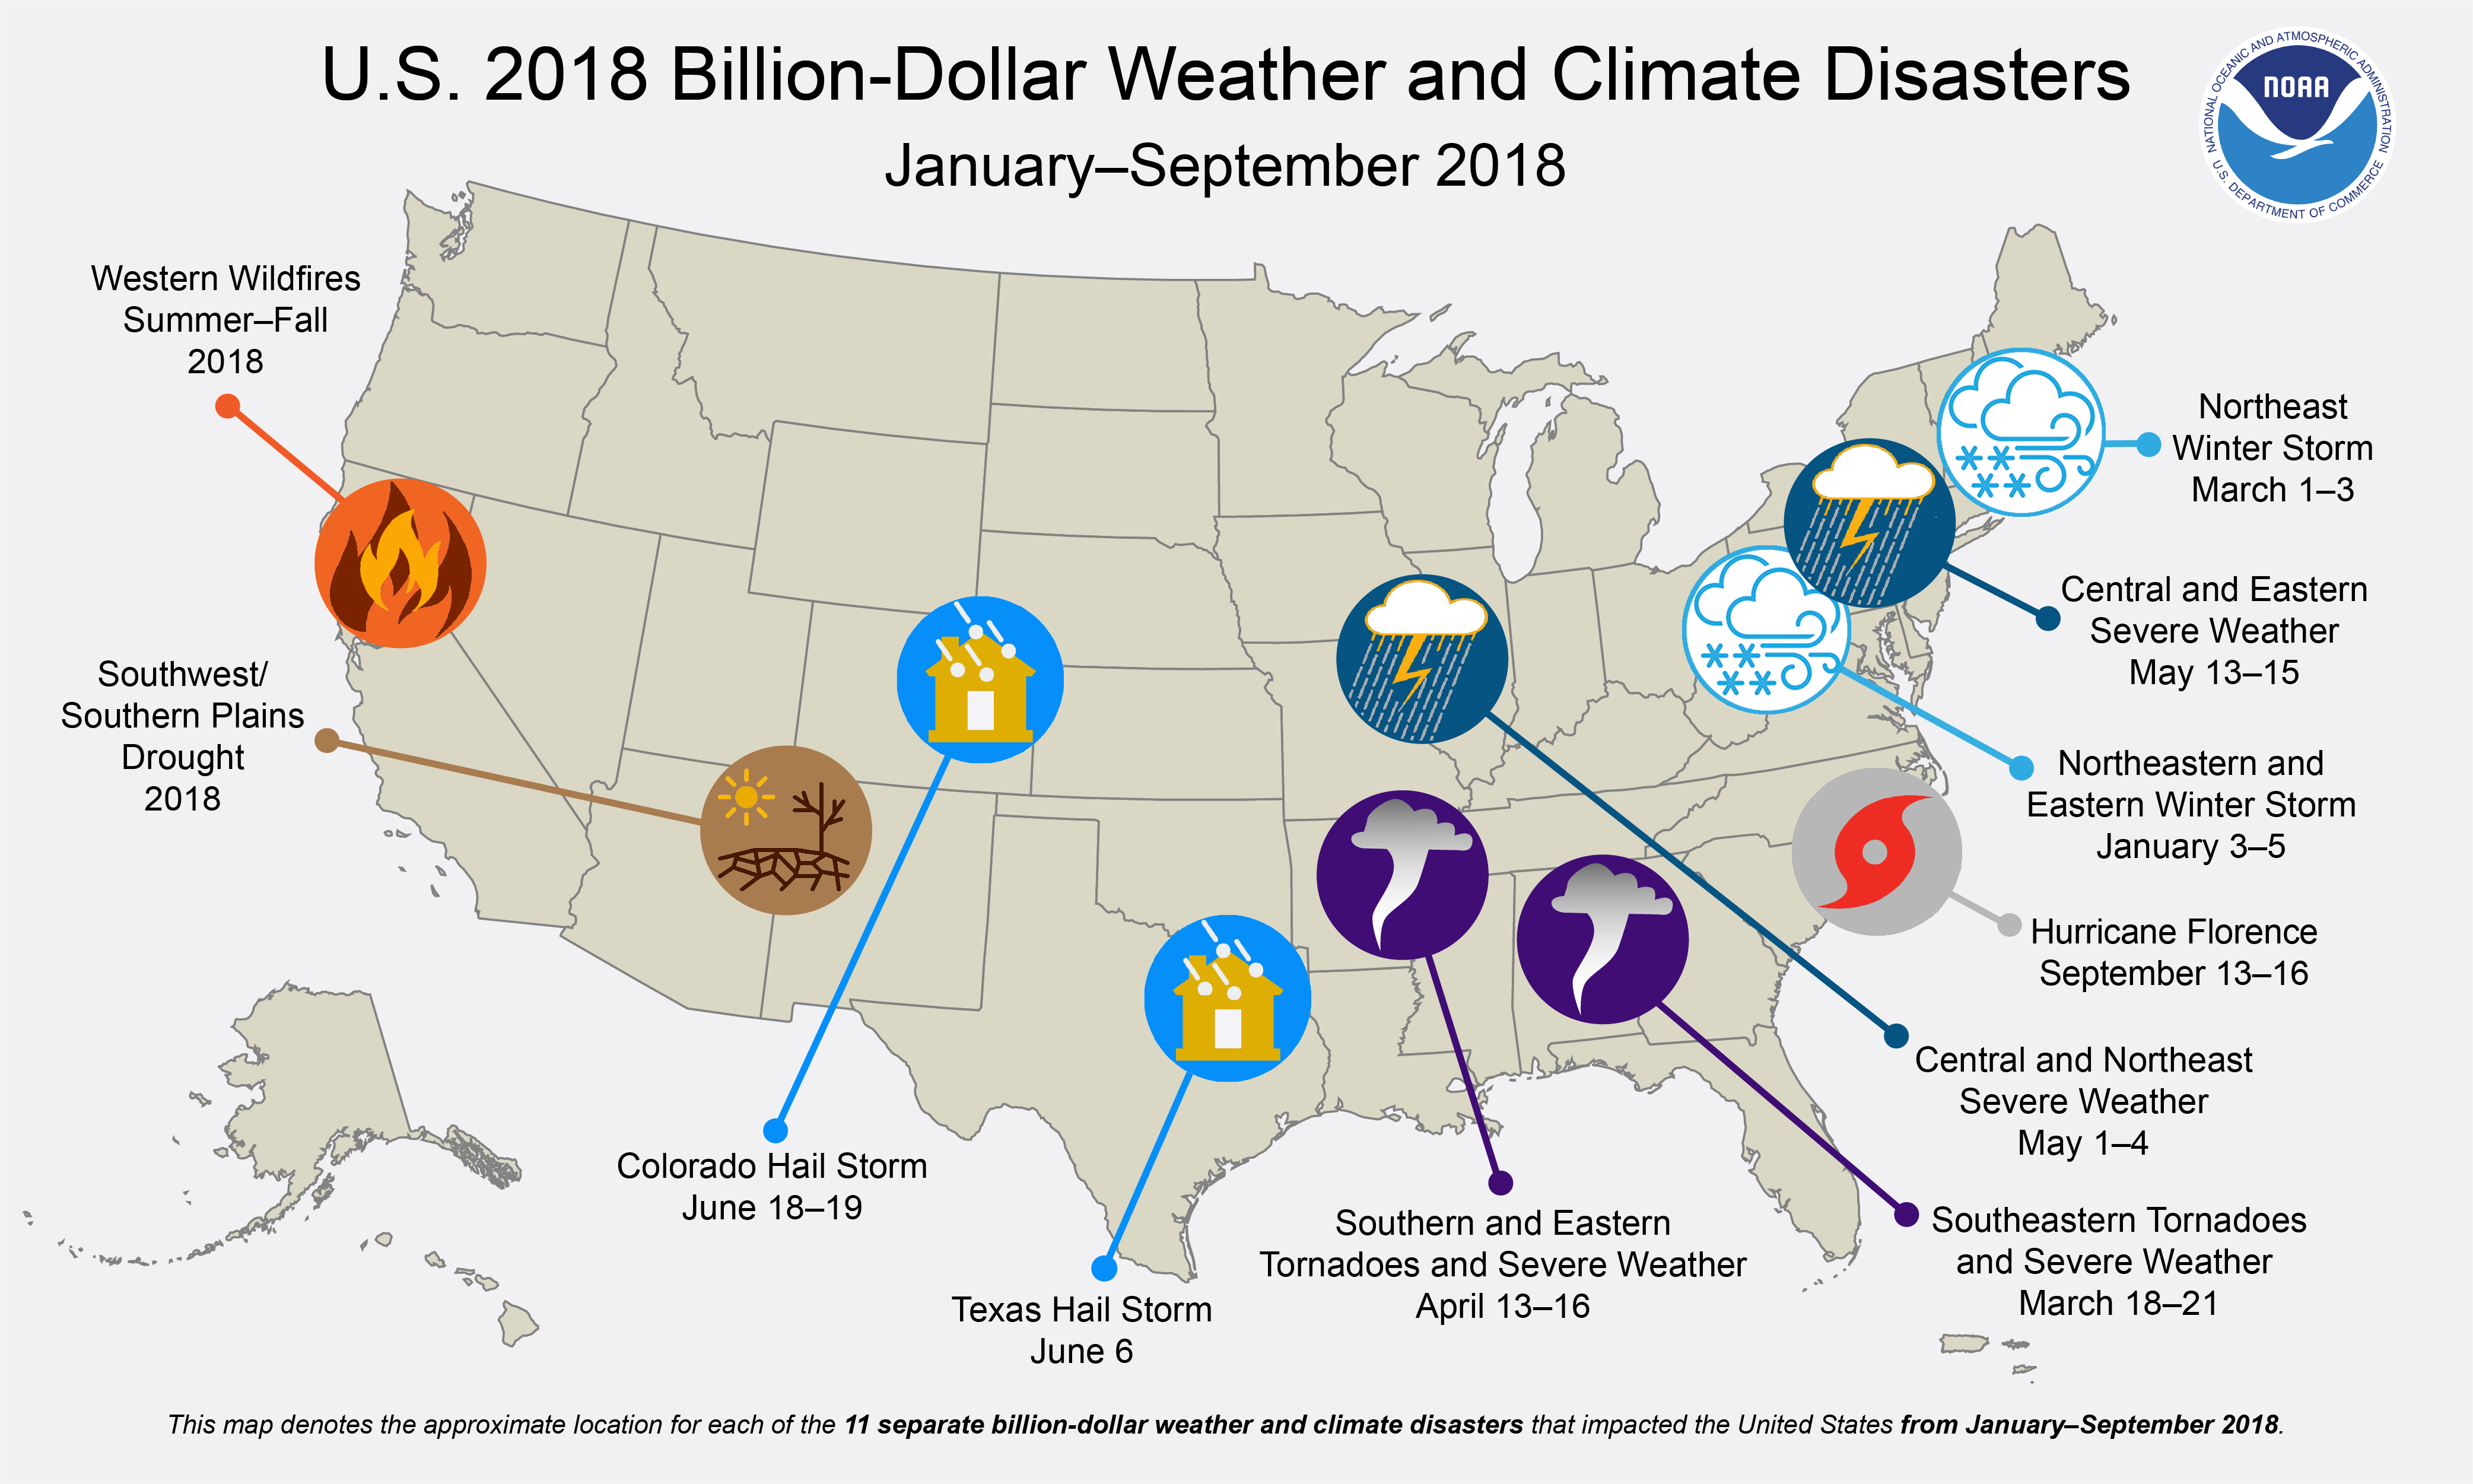 Extreme weather disasters are worsening in the United States